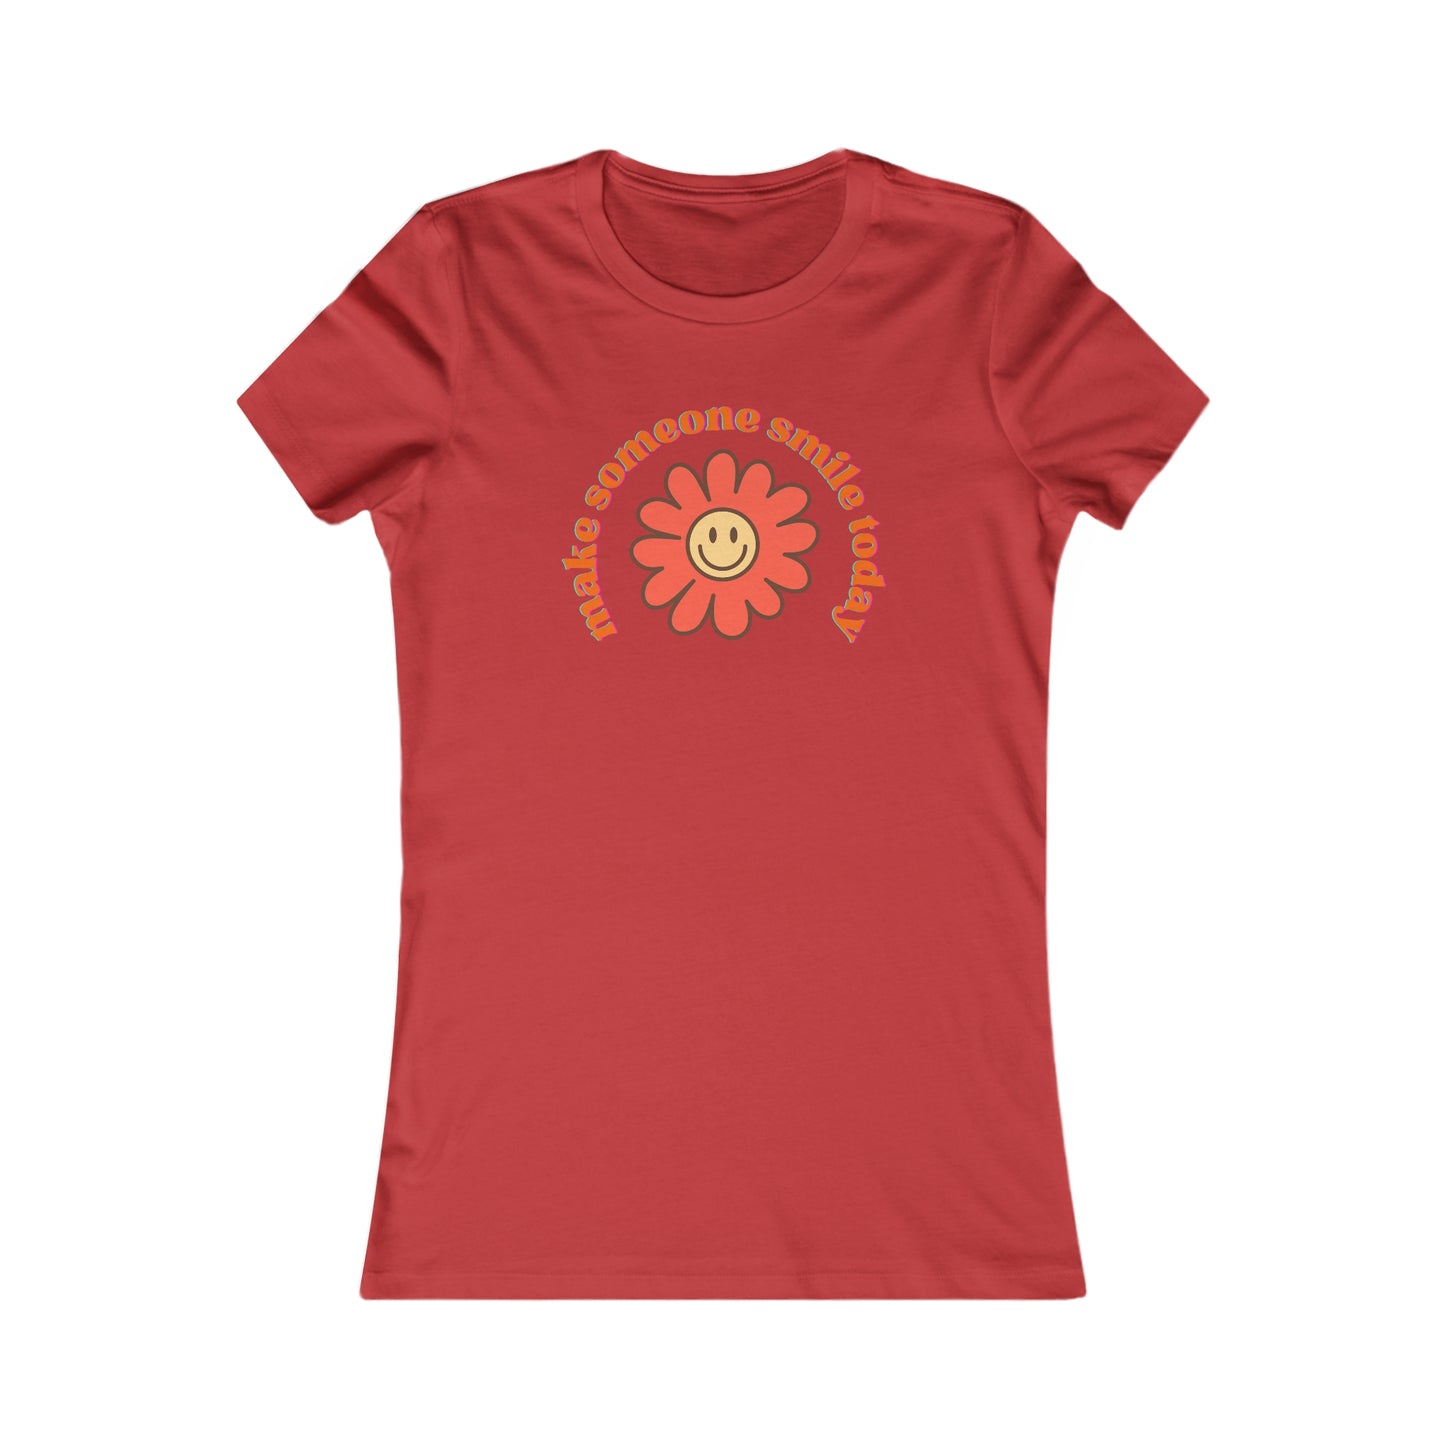 A call to “make someone smile today” message in the center of this Women's Favorite Tee design. Try it, you’ll be happy you did. Slim fit so please check the size table.